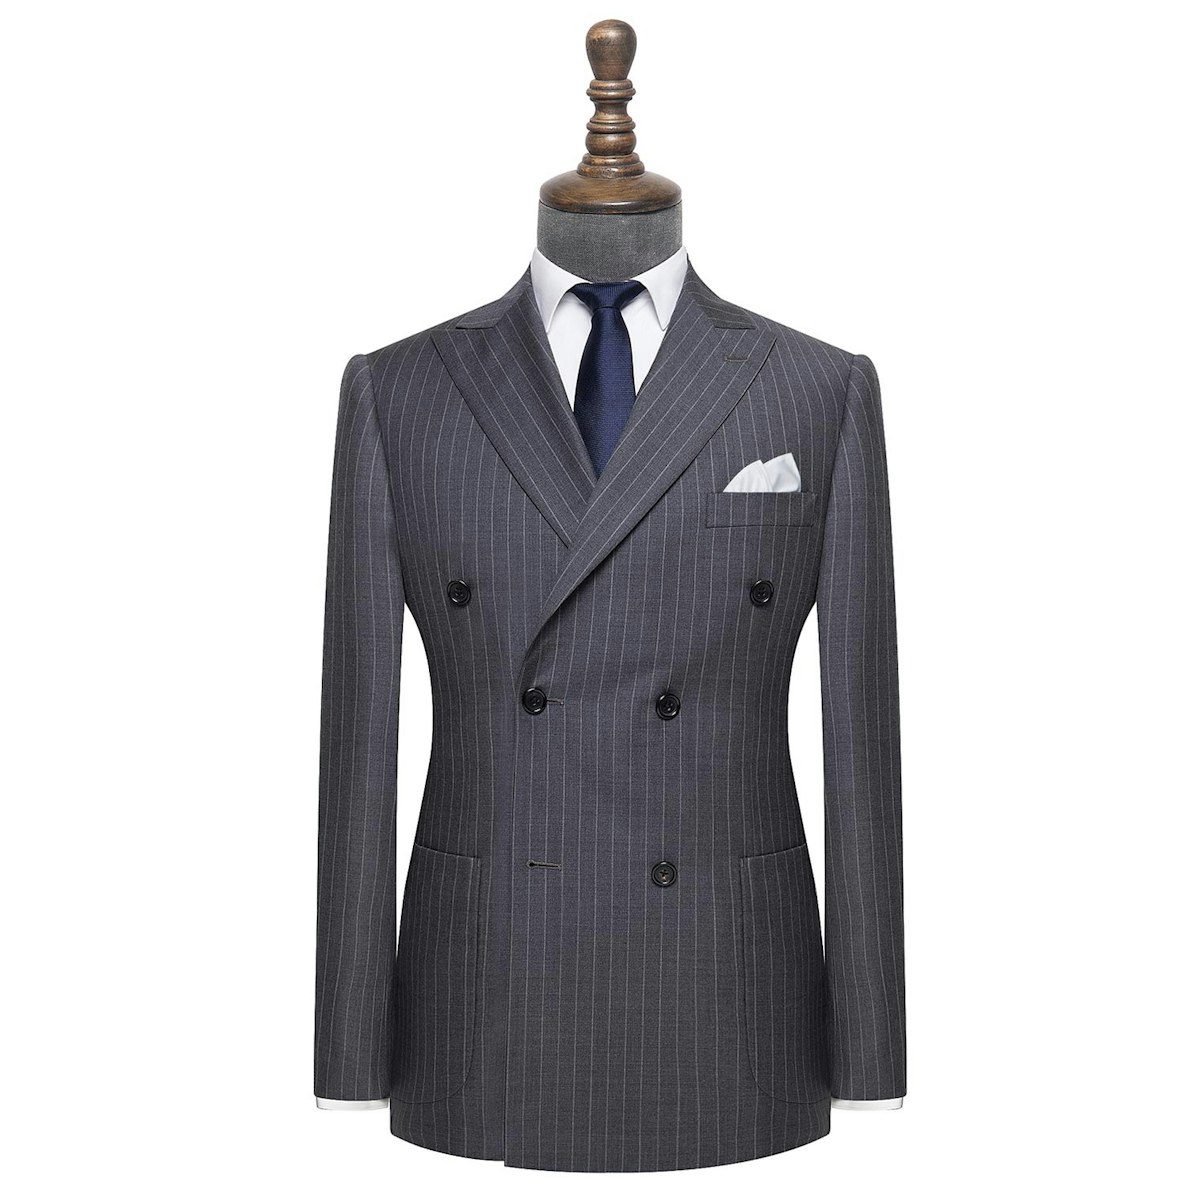 InStitchu Collection The Bolton mens suit